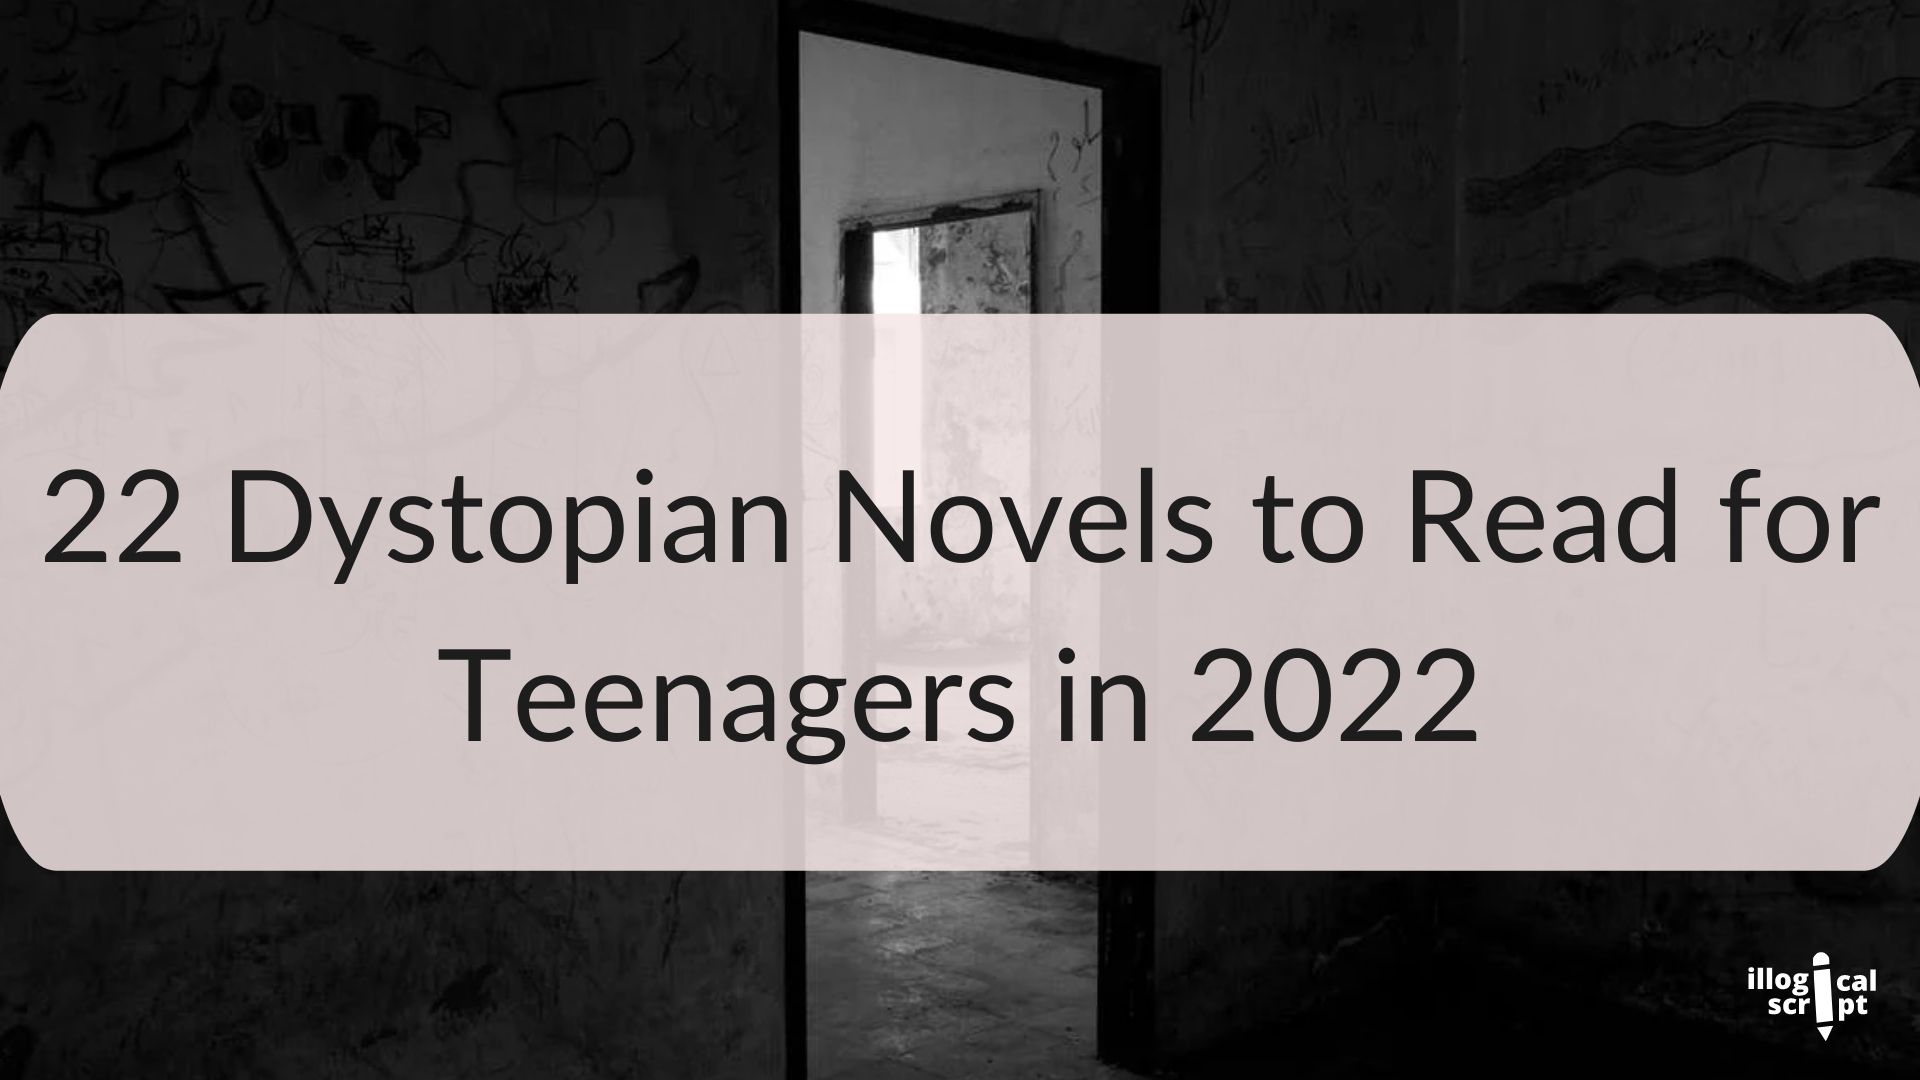 22 Dystopian Novels For Teenagers to Read | 2022